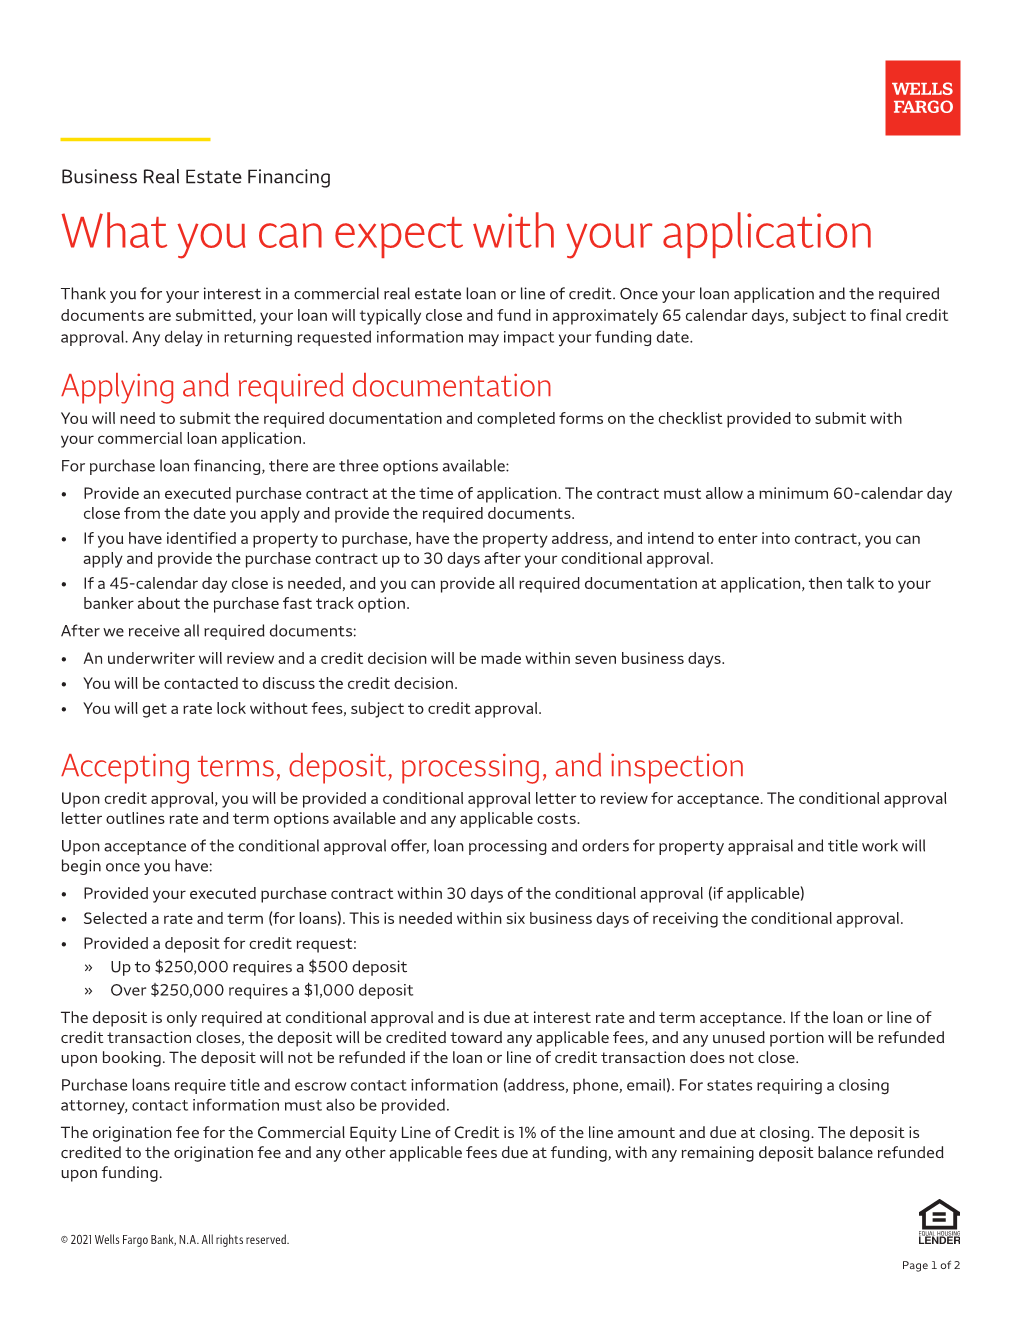 Learn What to Expect with Your Application (PDF)